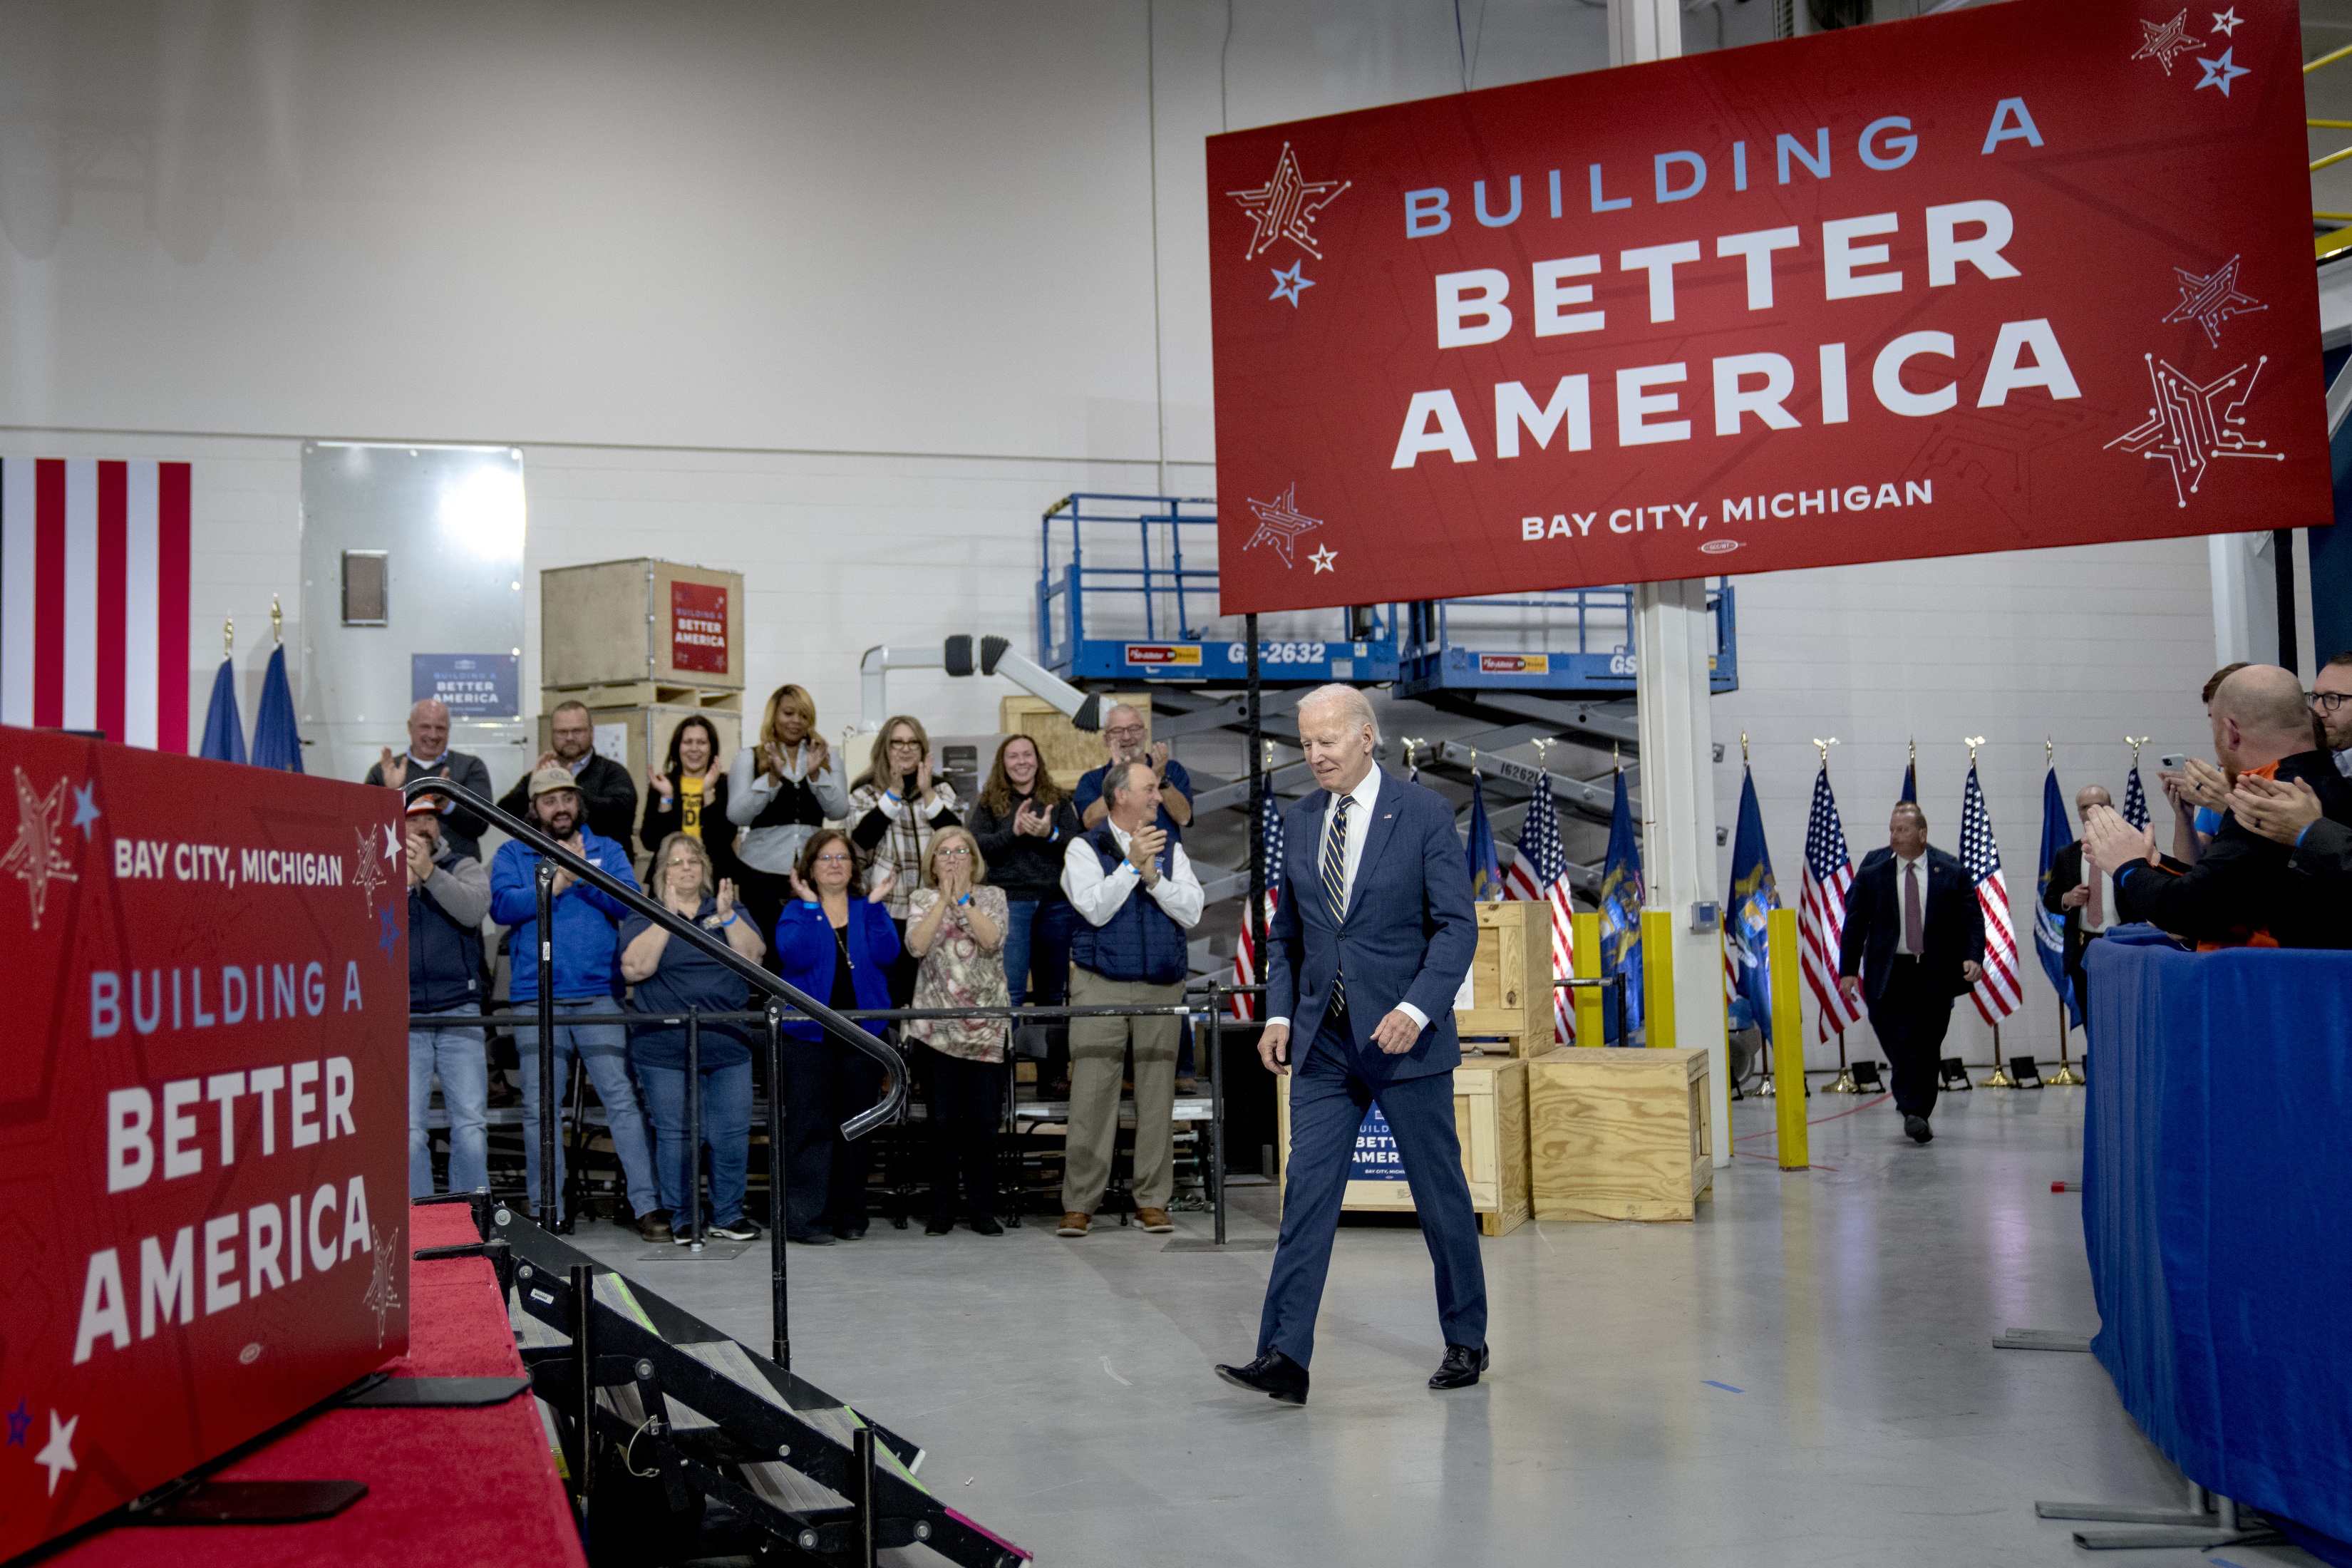 Joe Biden, pictured mid-stride, walks under a large red banner that reads: “Building a Better America.” A small group of people look on and clap.